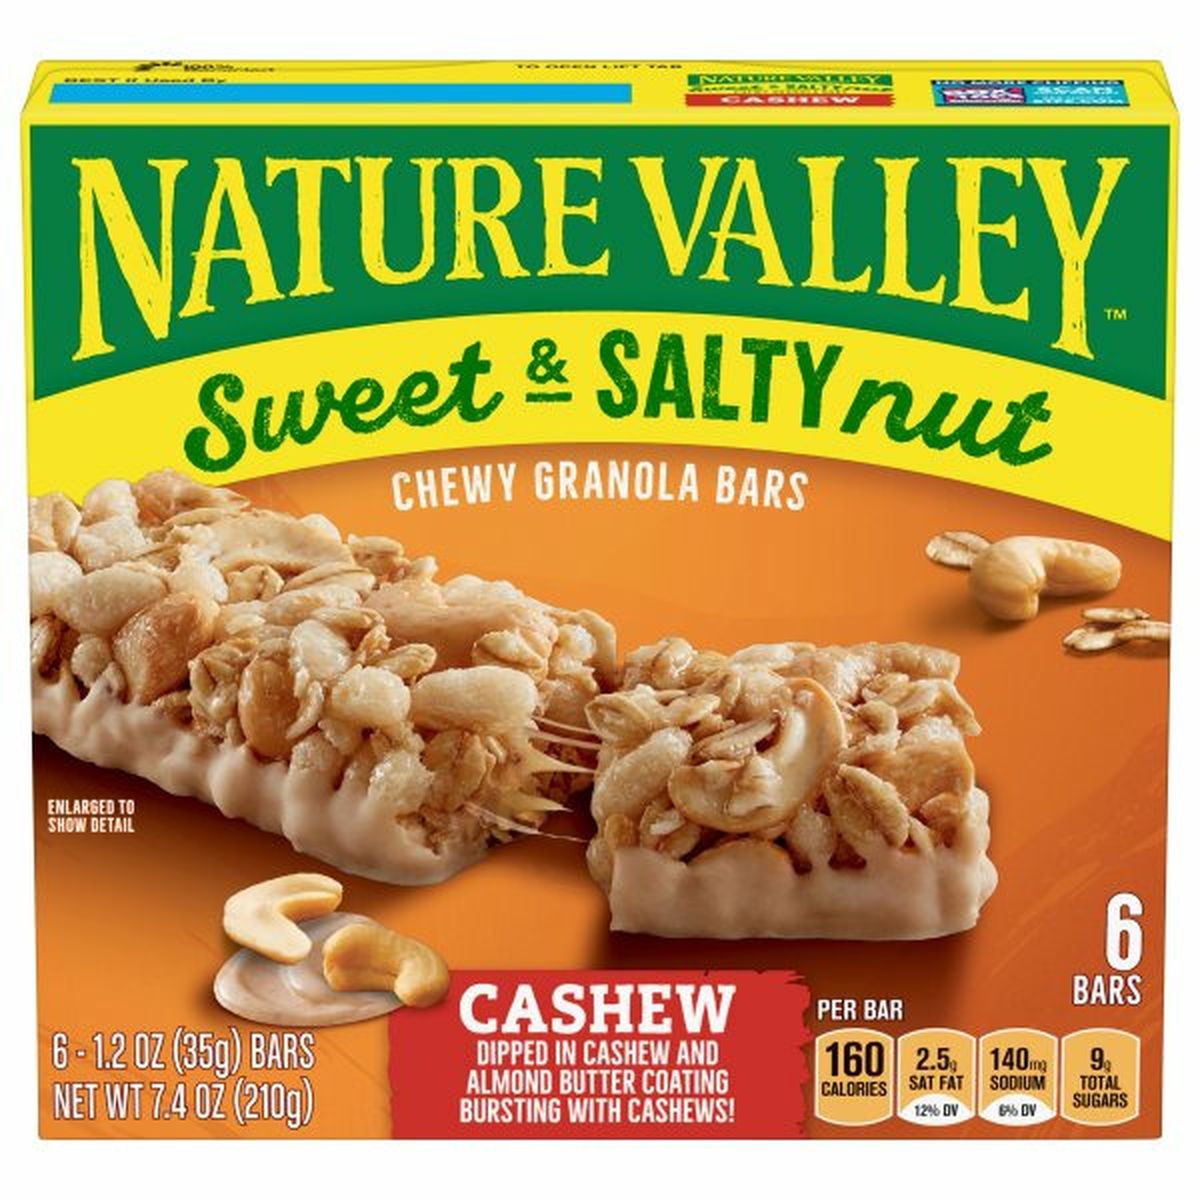 Calories in Nature Valley Granola Bars, Cashew, Sweet & Salty Nut, Chewy